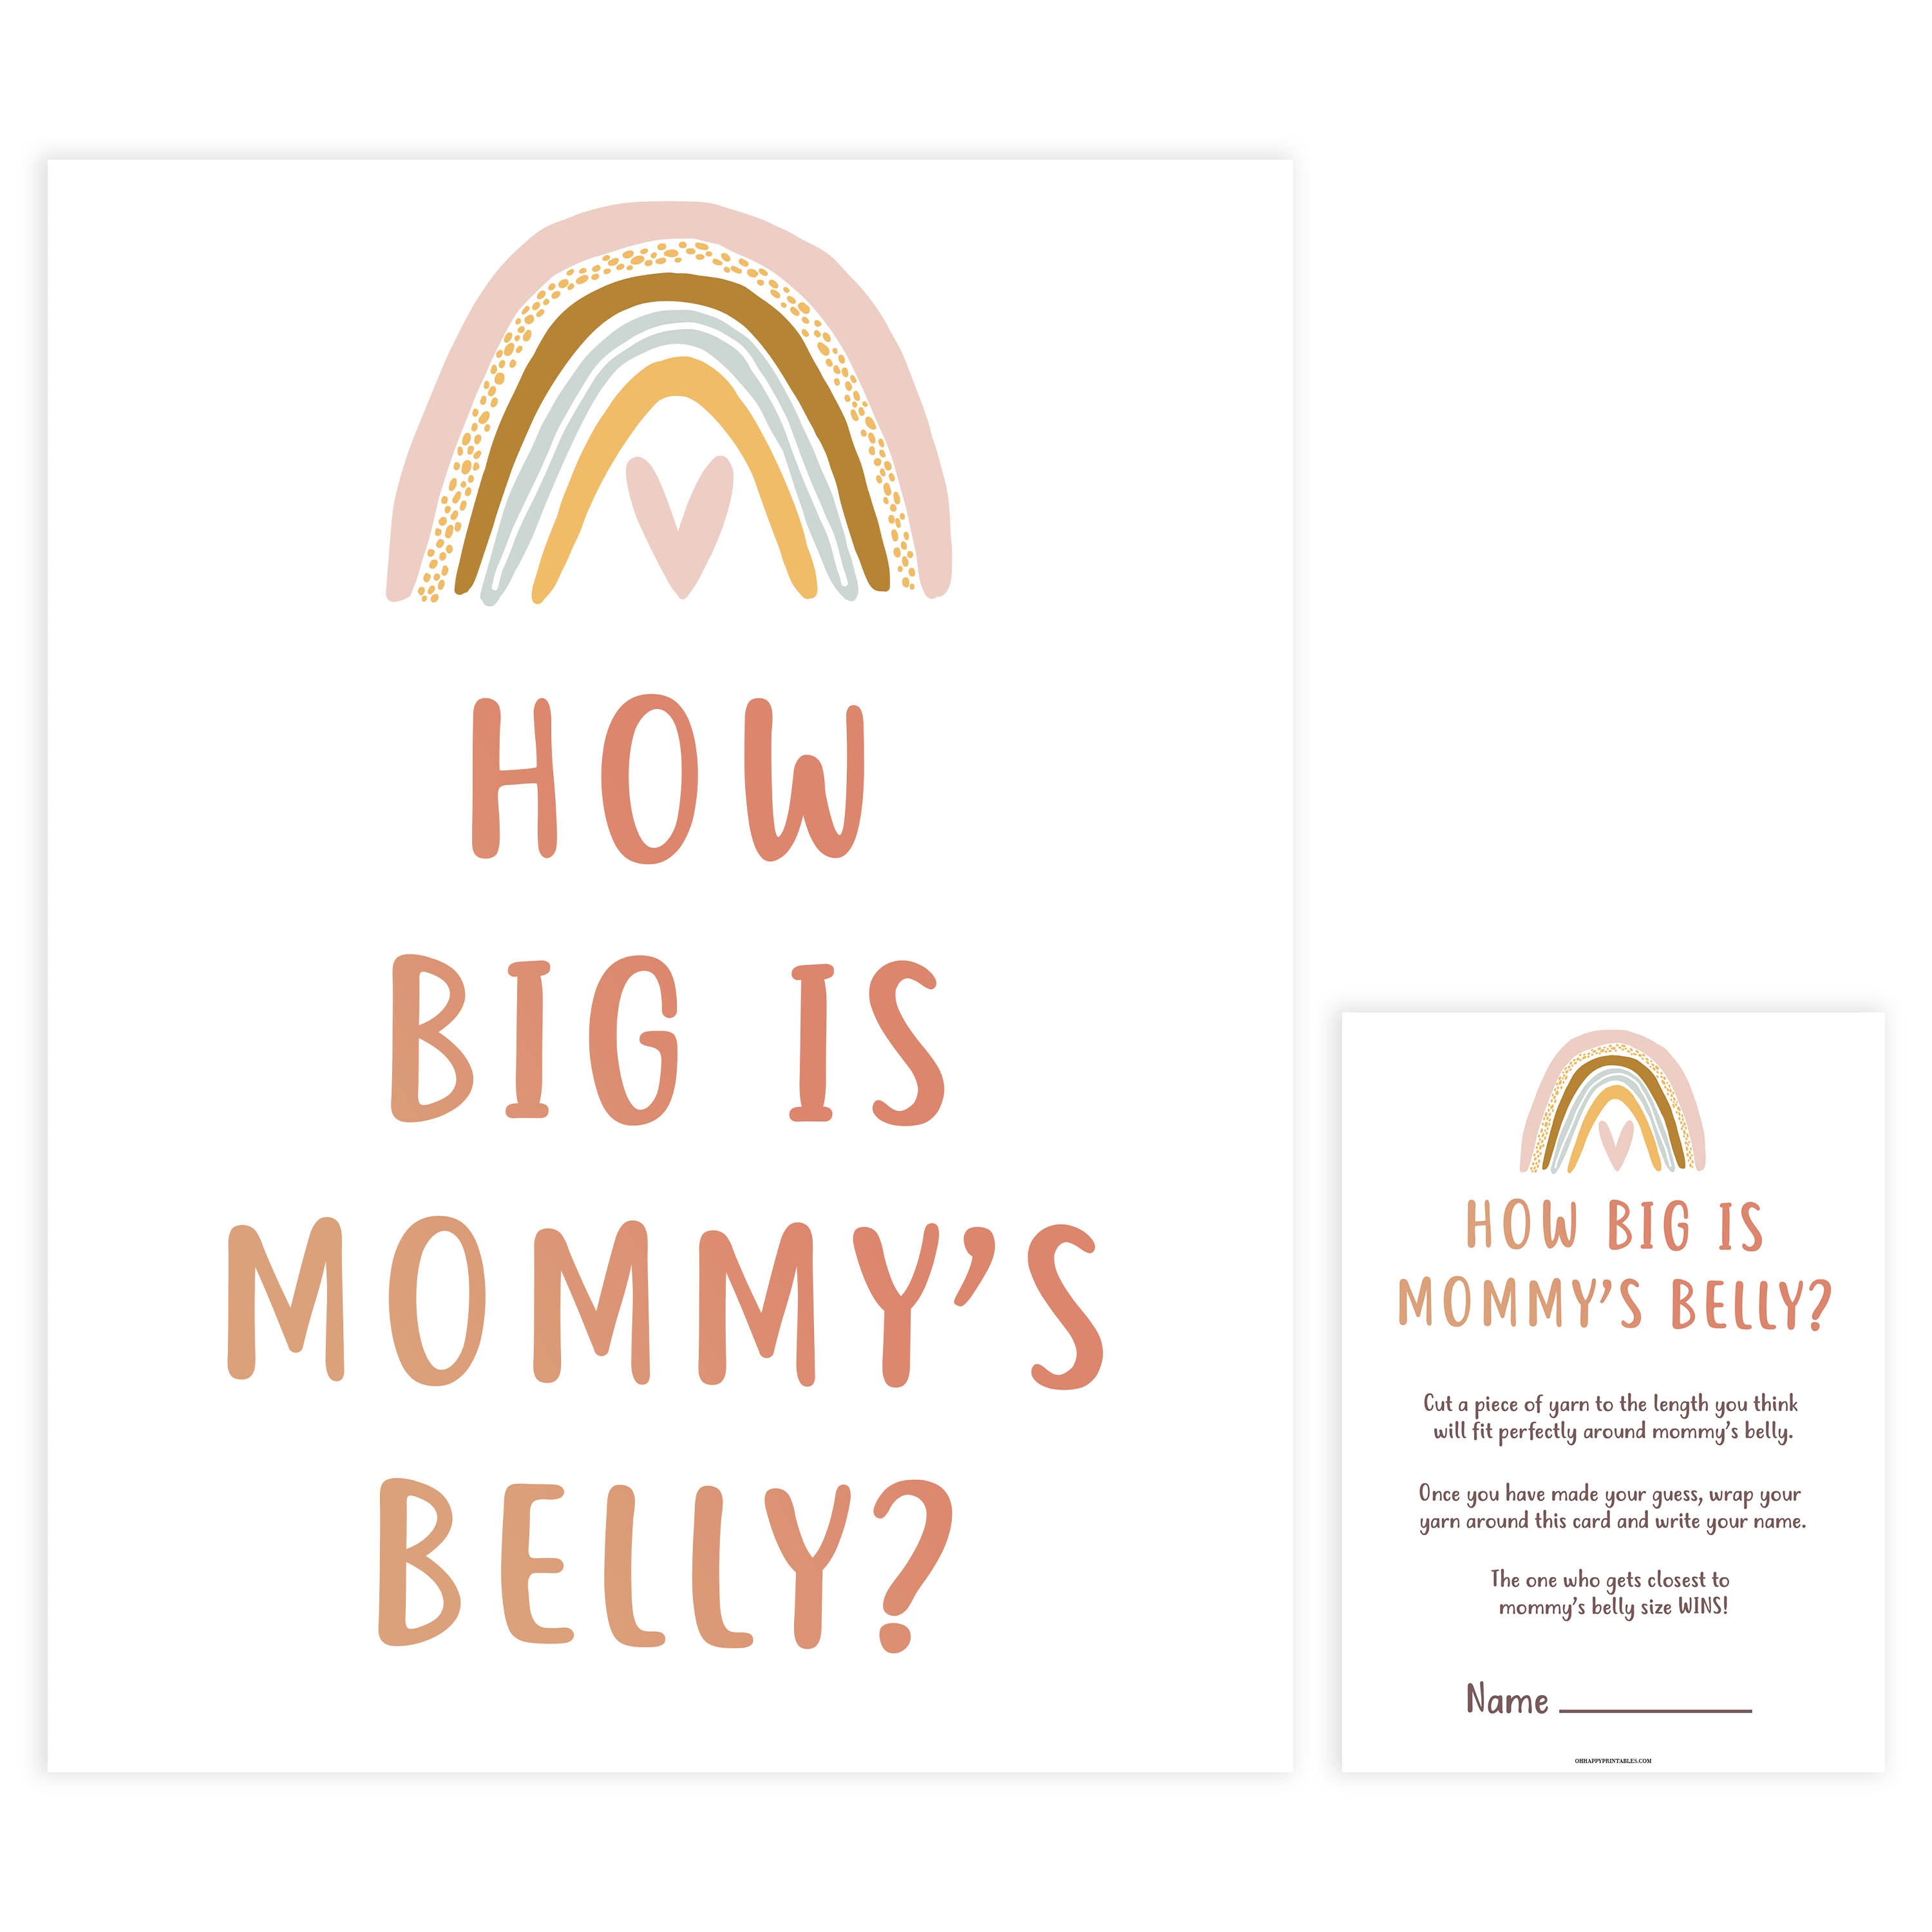 how big is mommys belly game, Printable baby shower games, boho rainbow baby games, baby shower games, fun baby shower ideas, top baby shower ideas, boho rainbow baby shower, baby shower games, fun boho rainbow baby shower ideas